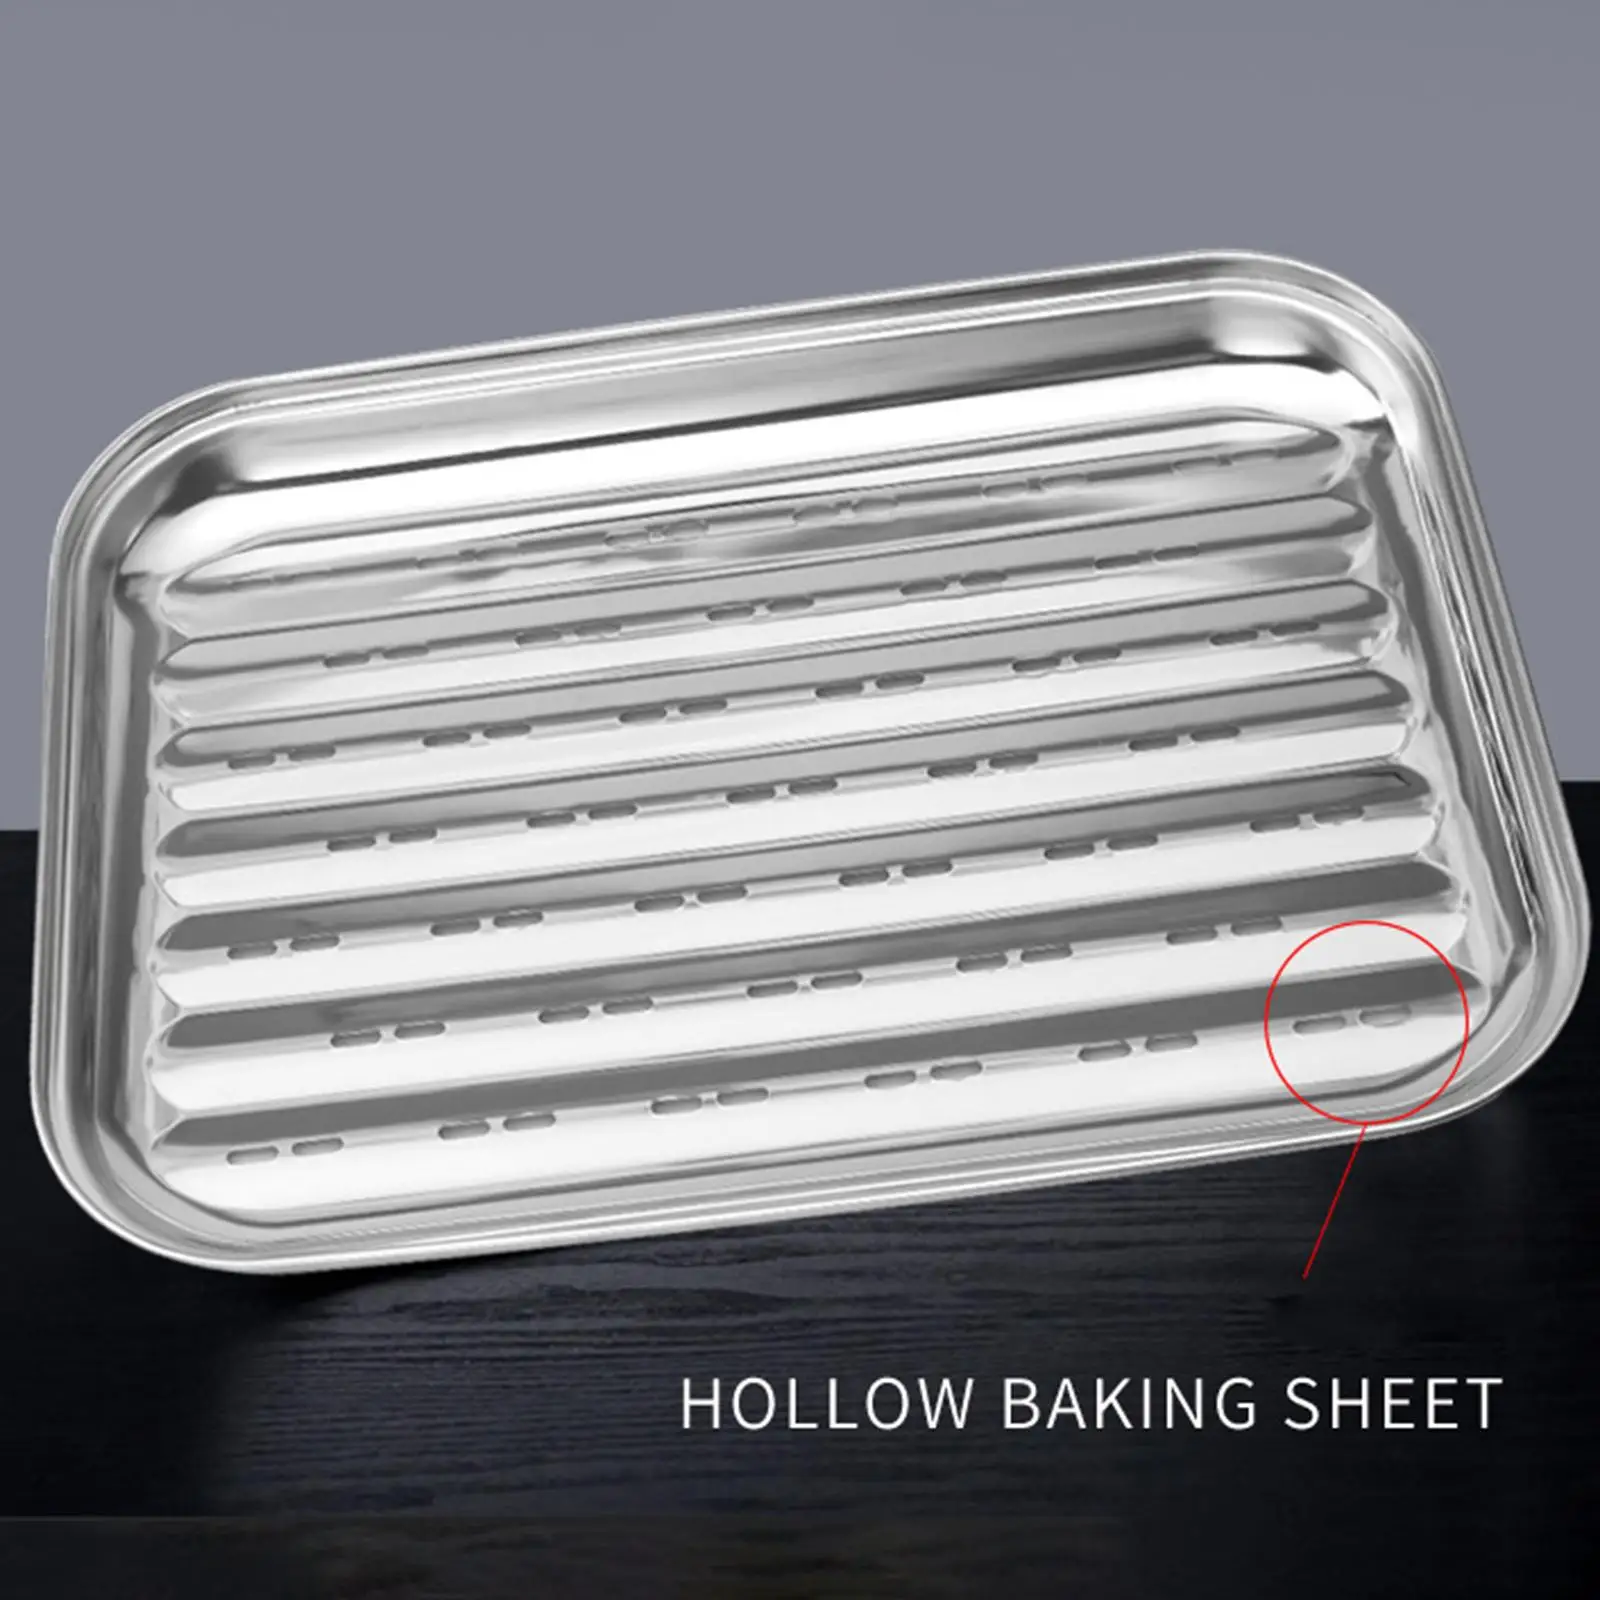 Square Baking Sheet Professional Mirror Finish Easy Clean Hollow One Piece Reusable Baking Pan Tray for Oven dessert BBQ